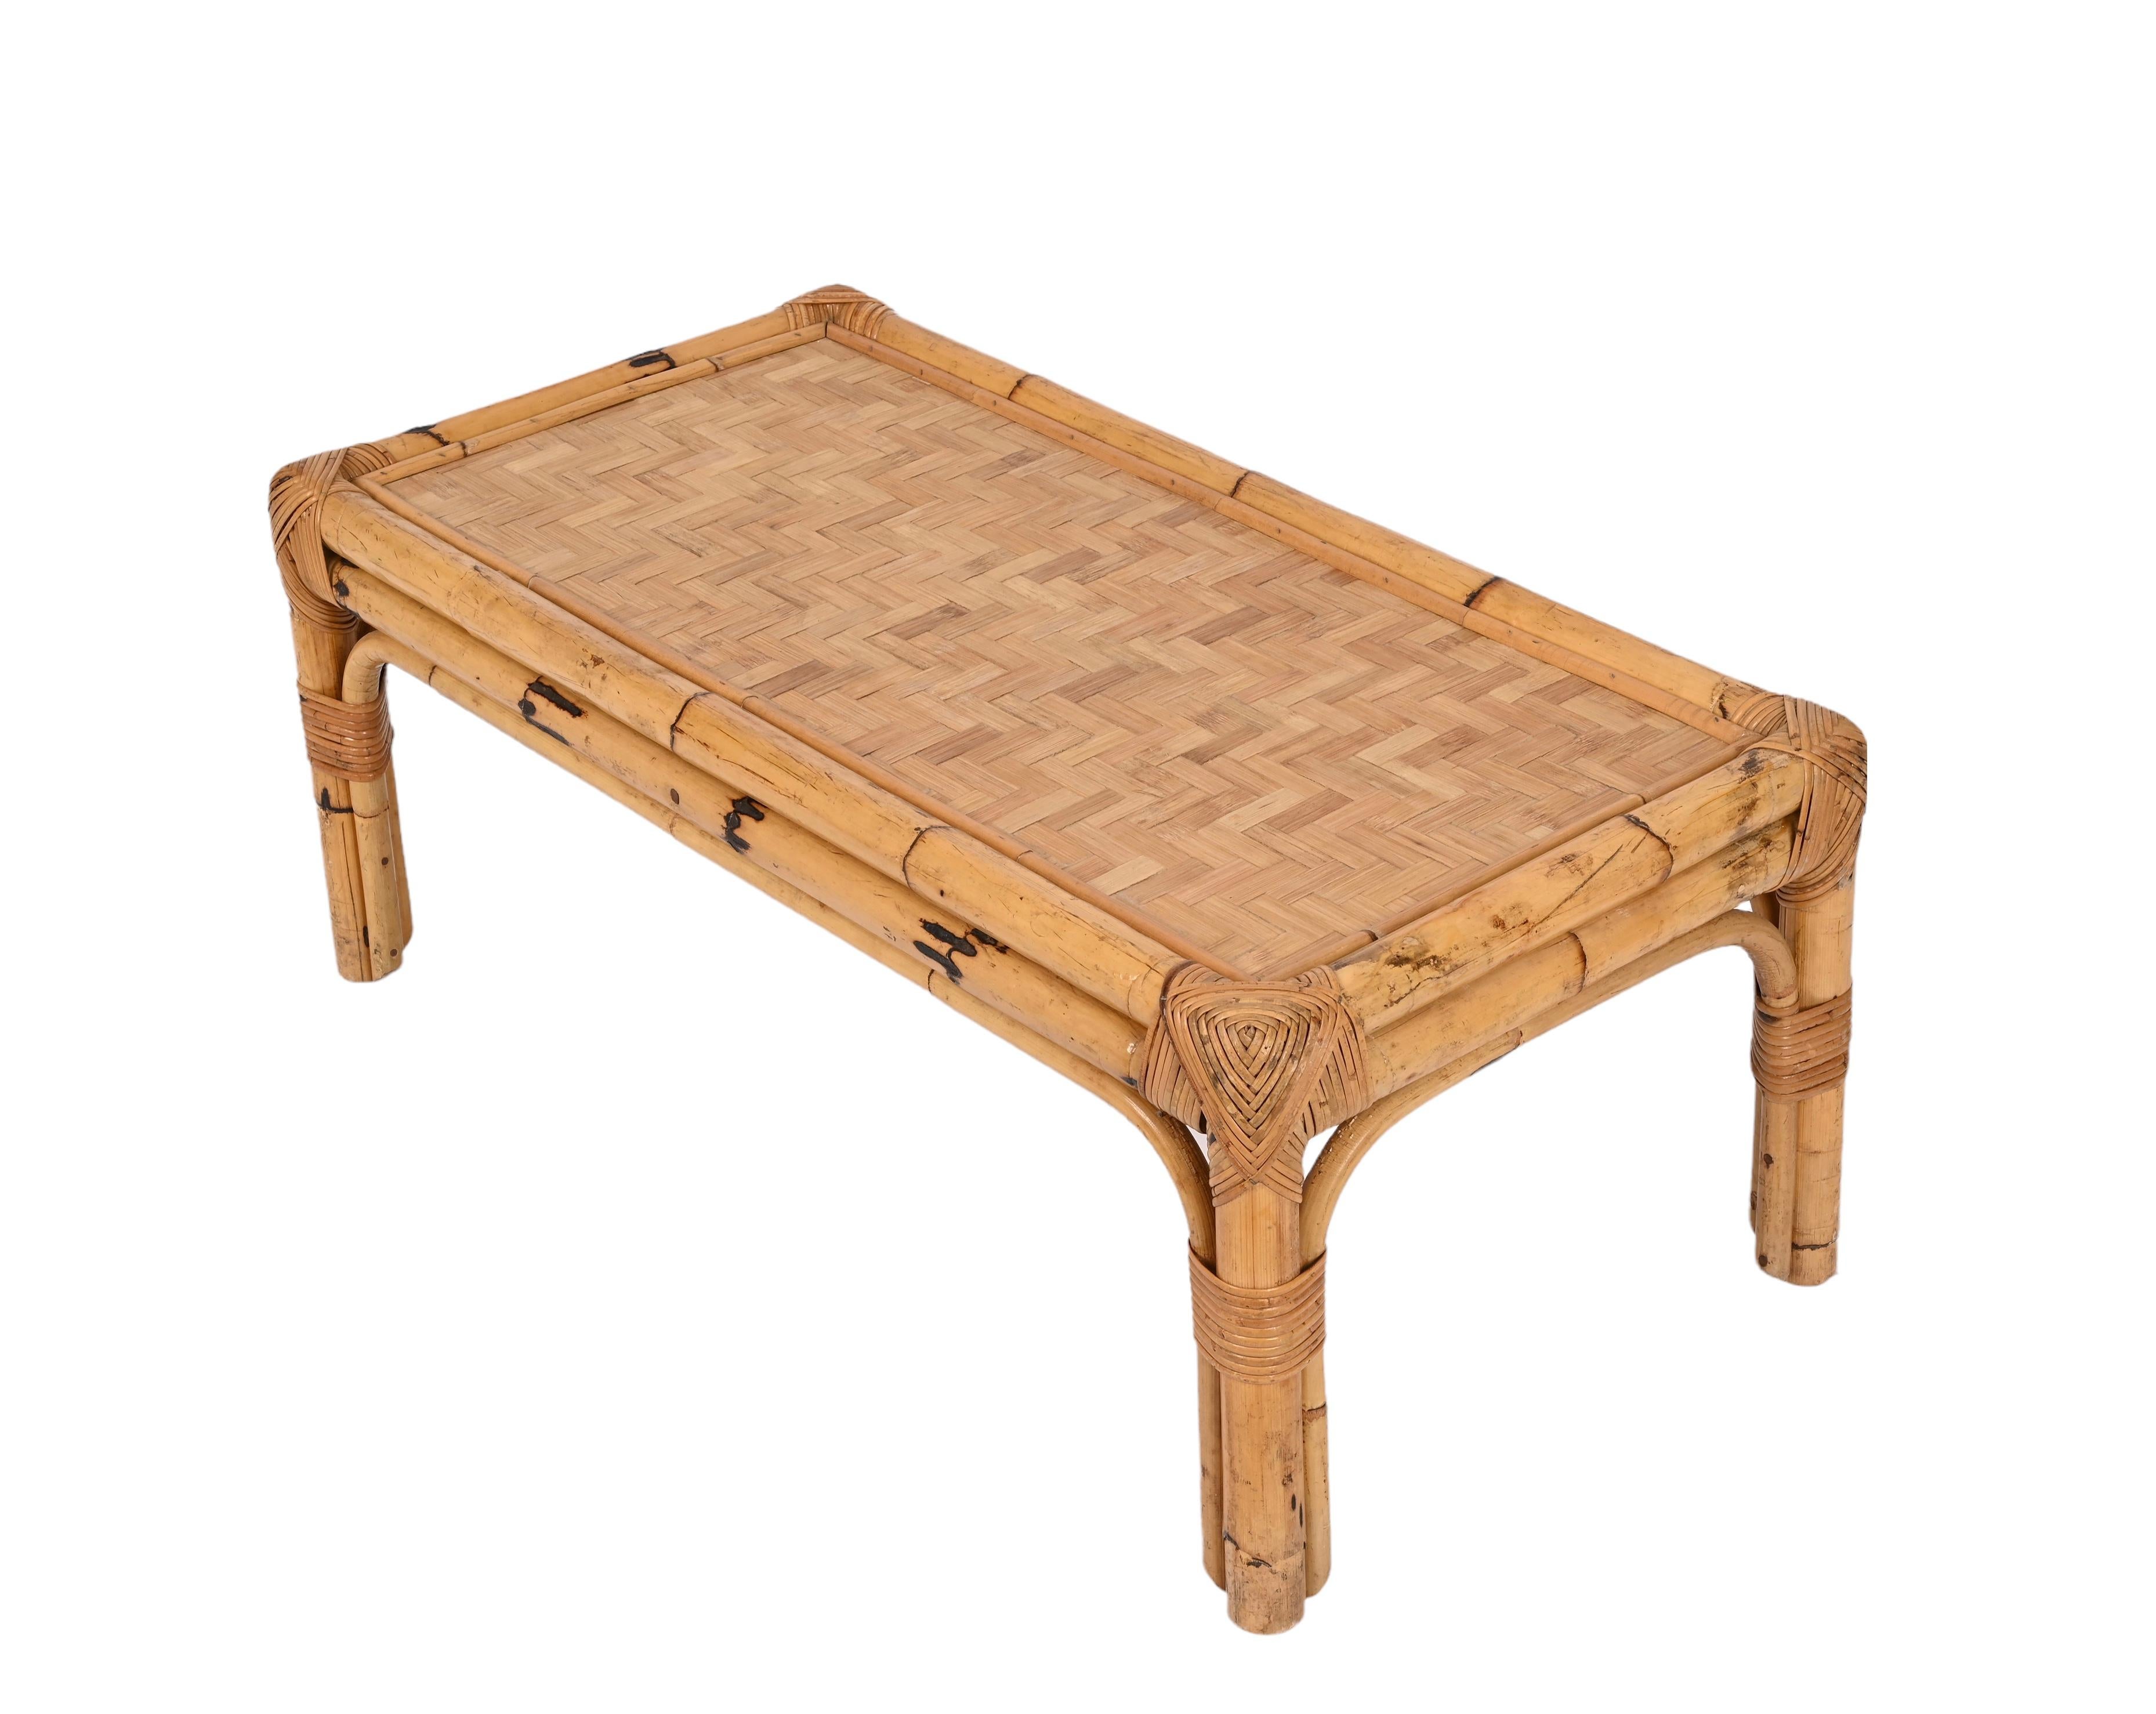 Amazing Mid-Century Modern Italian bamboo and rattan rectangular coffee table. This wonderful item was designed by Vivai del Sud in Italy during the 1970s.

You are going to love the solid structure of this table, straight lines of the bamboo kept